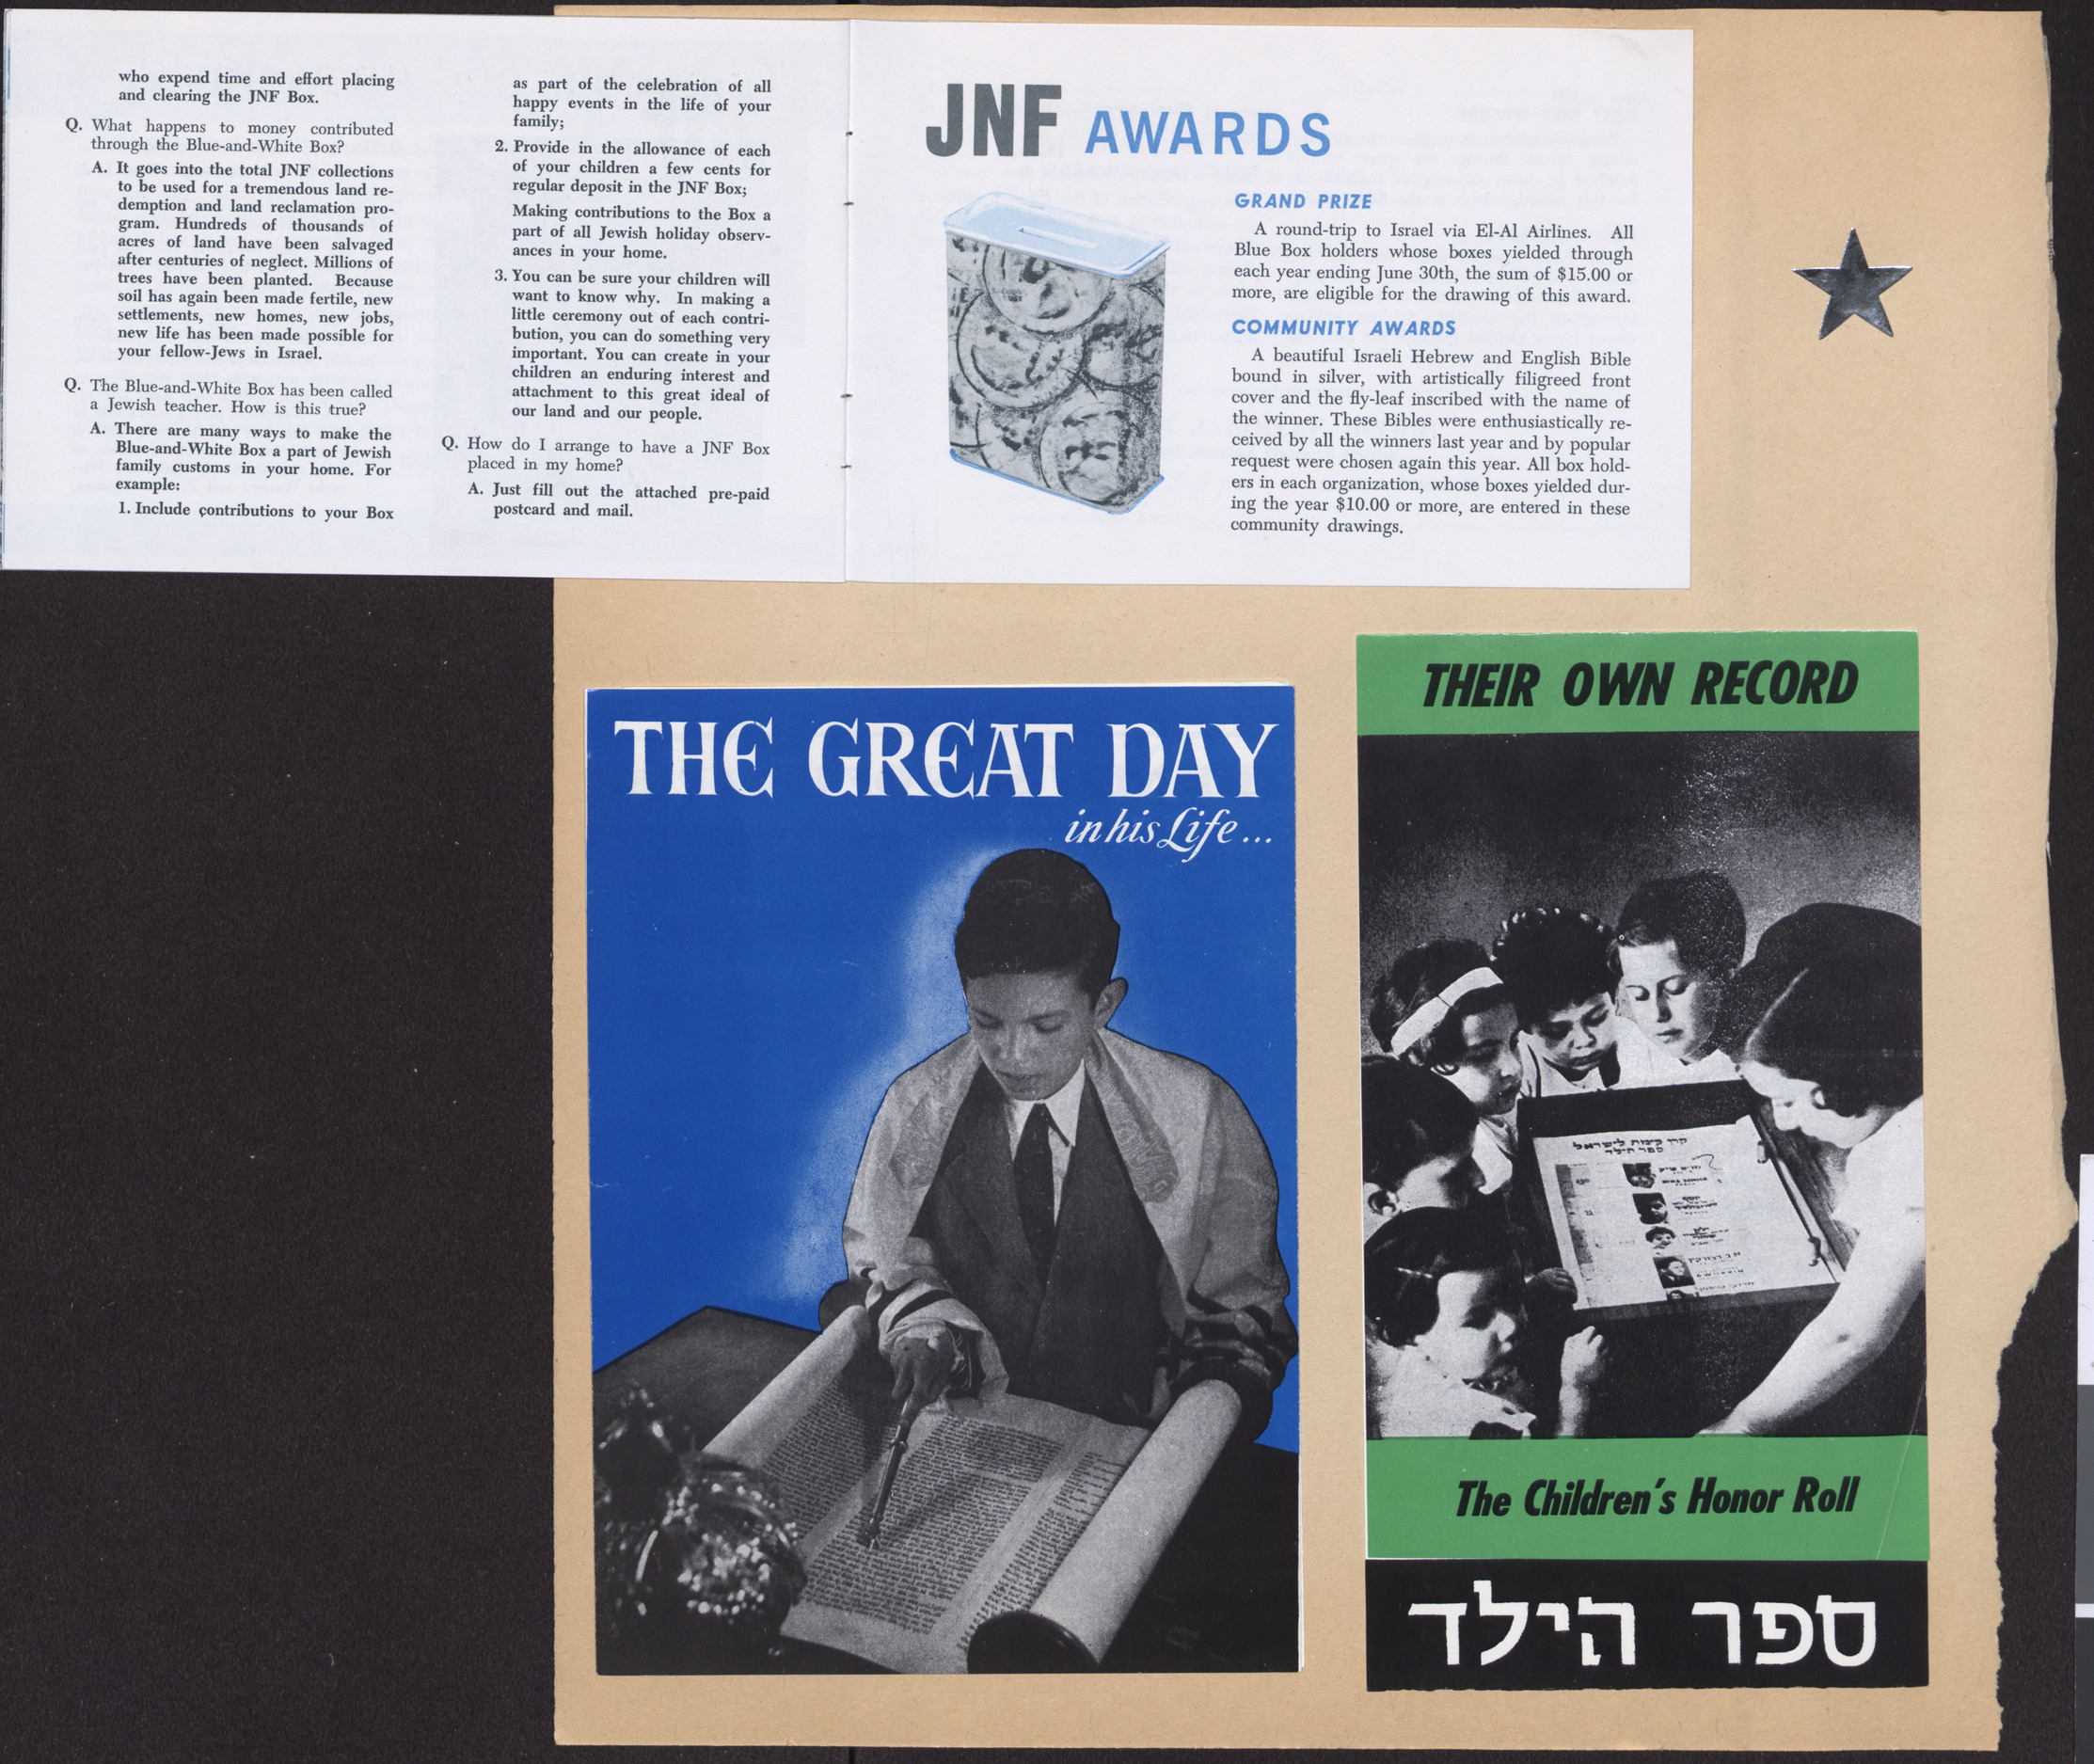 Pamphlet, The Box That Built a Nation, Jewish National Fund, pages 11-12